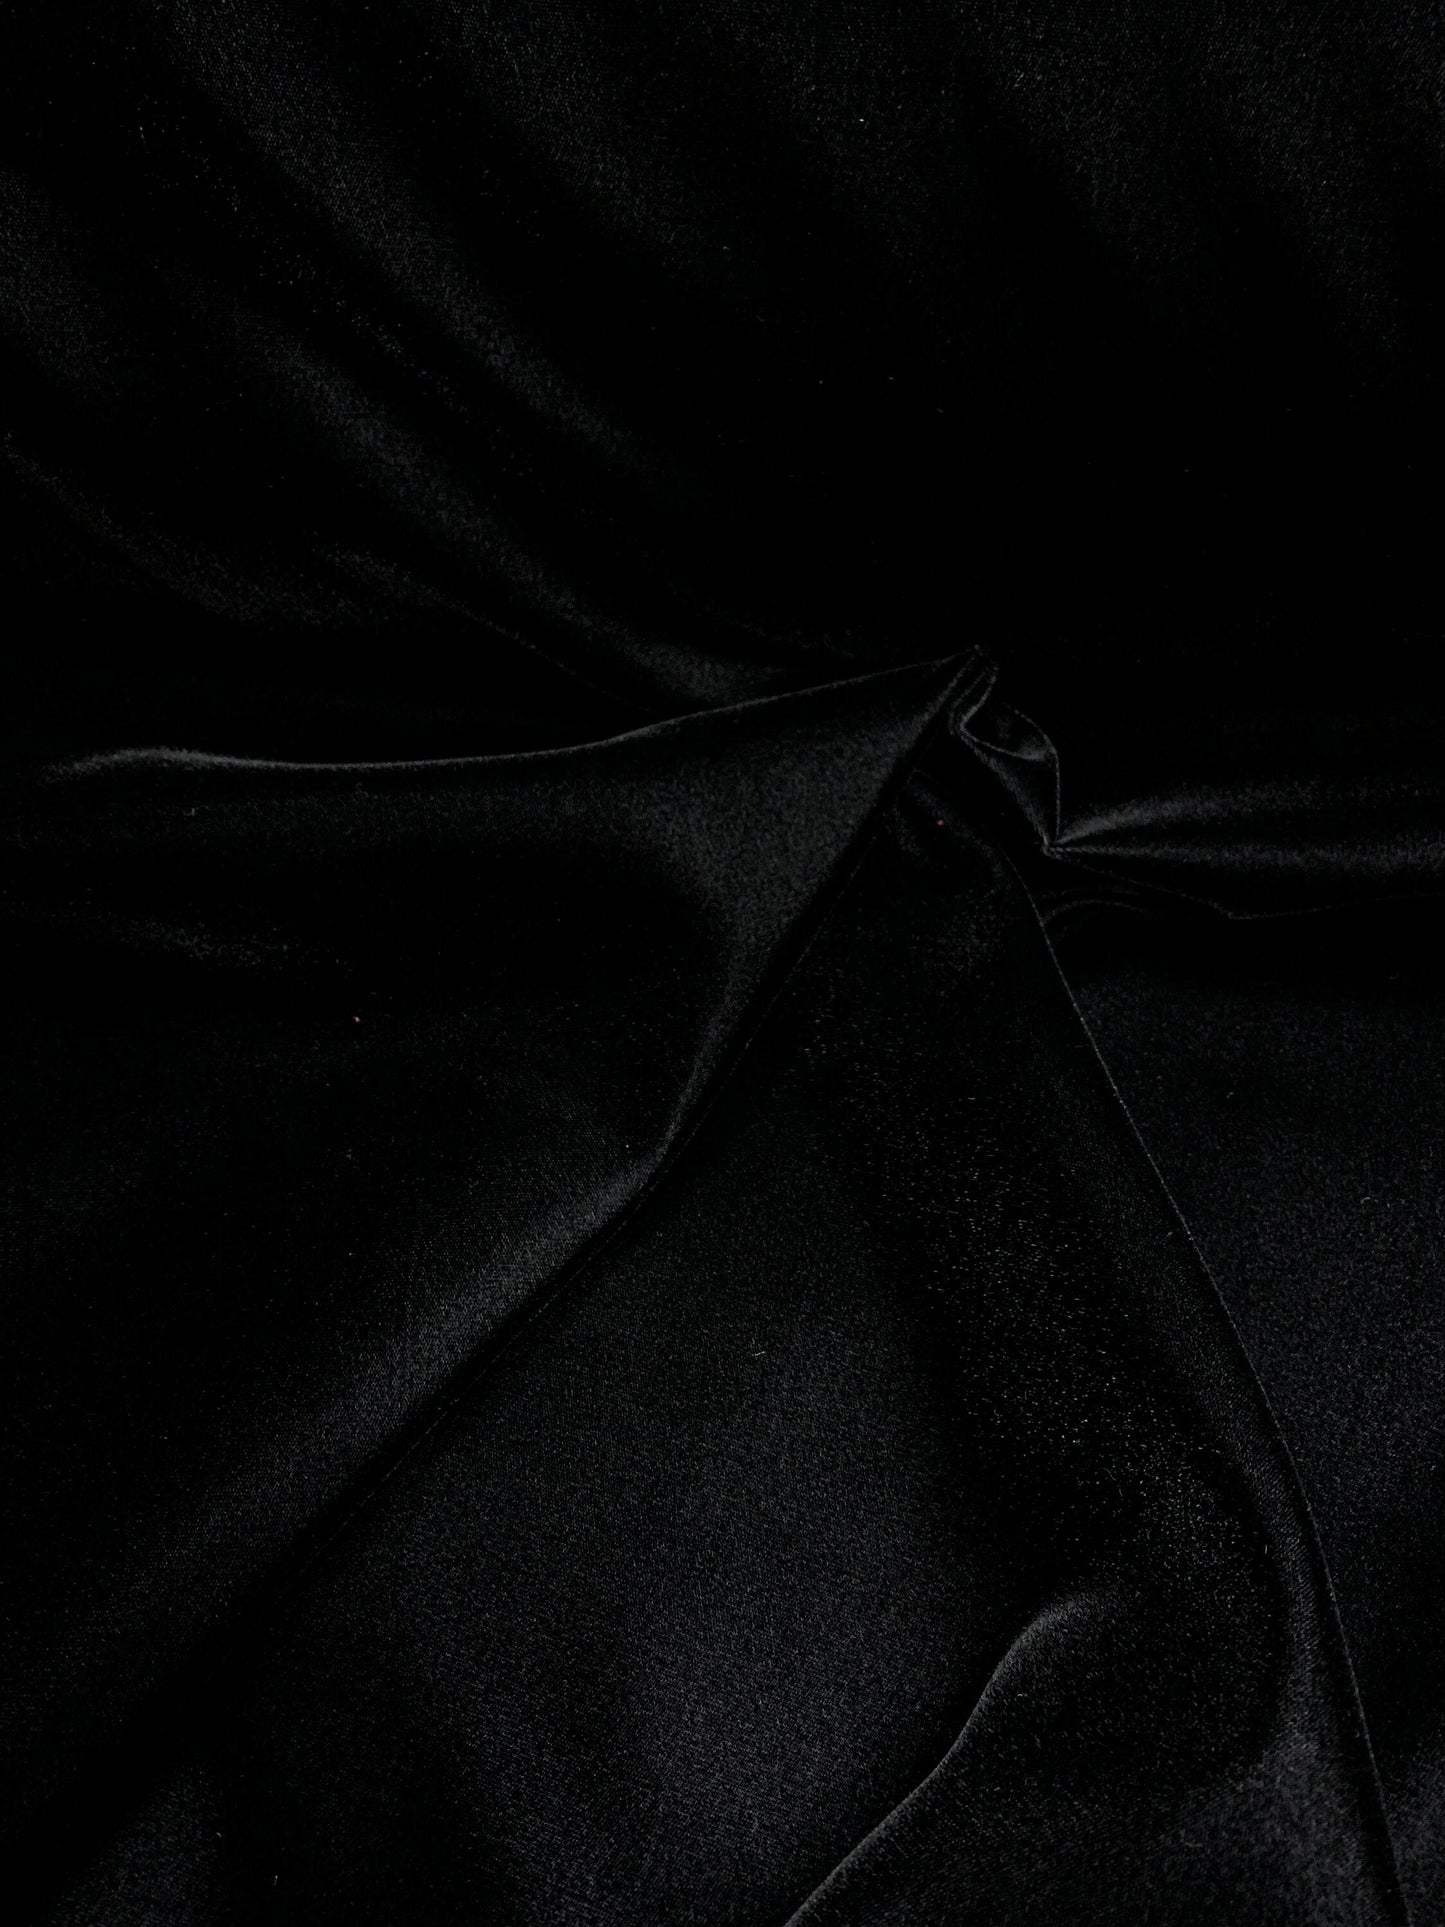 BLACK Solid 100% Polyester Micro Velvet Fabric (45 in.) Sold By The Yard